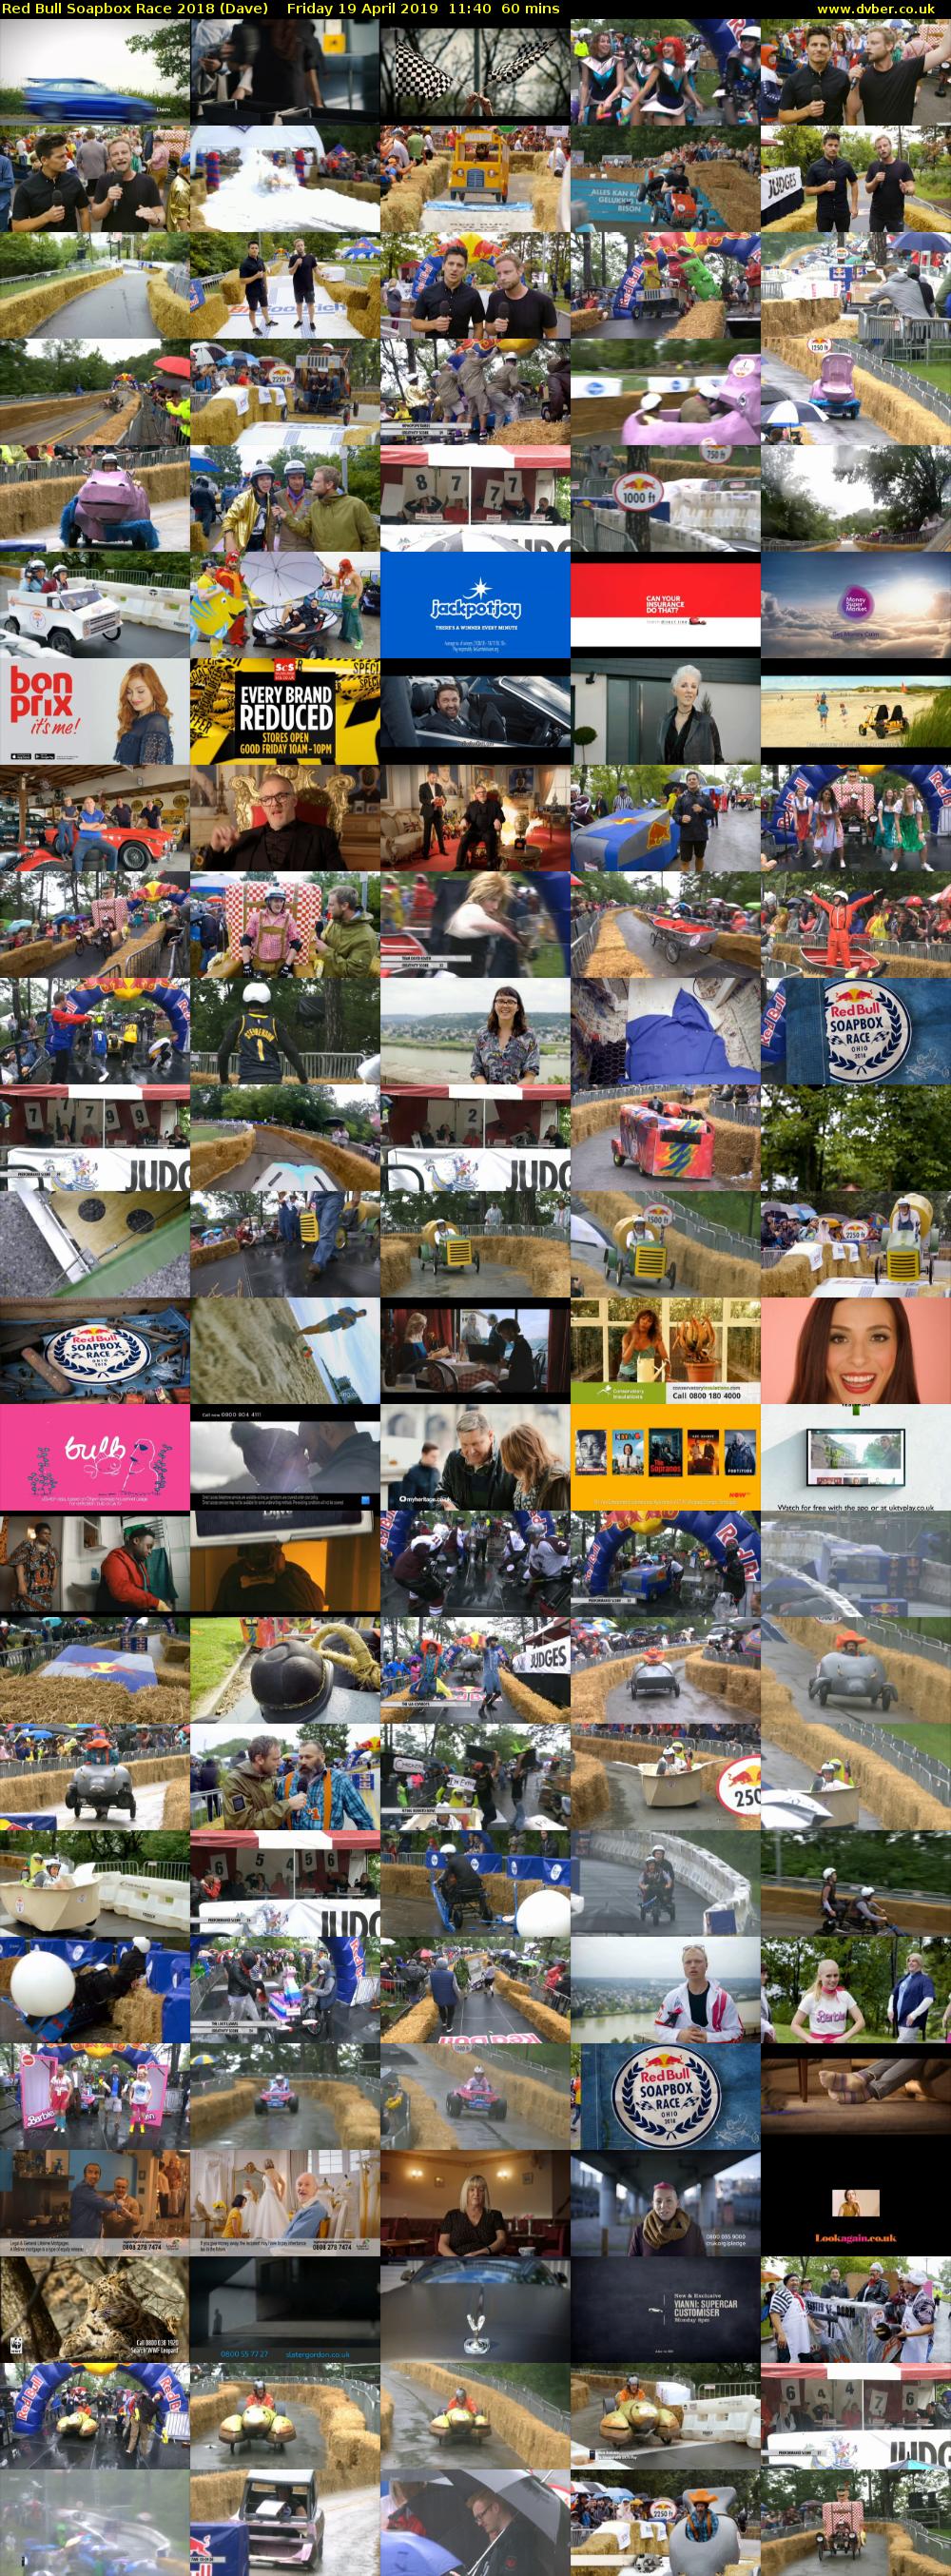 Red Bull Soapbox Race 2018 (Dave) Friday 19 April 2019 11:40 - 12:40